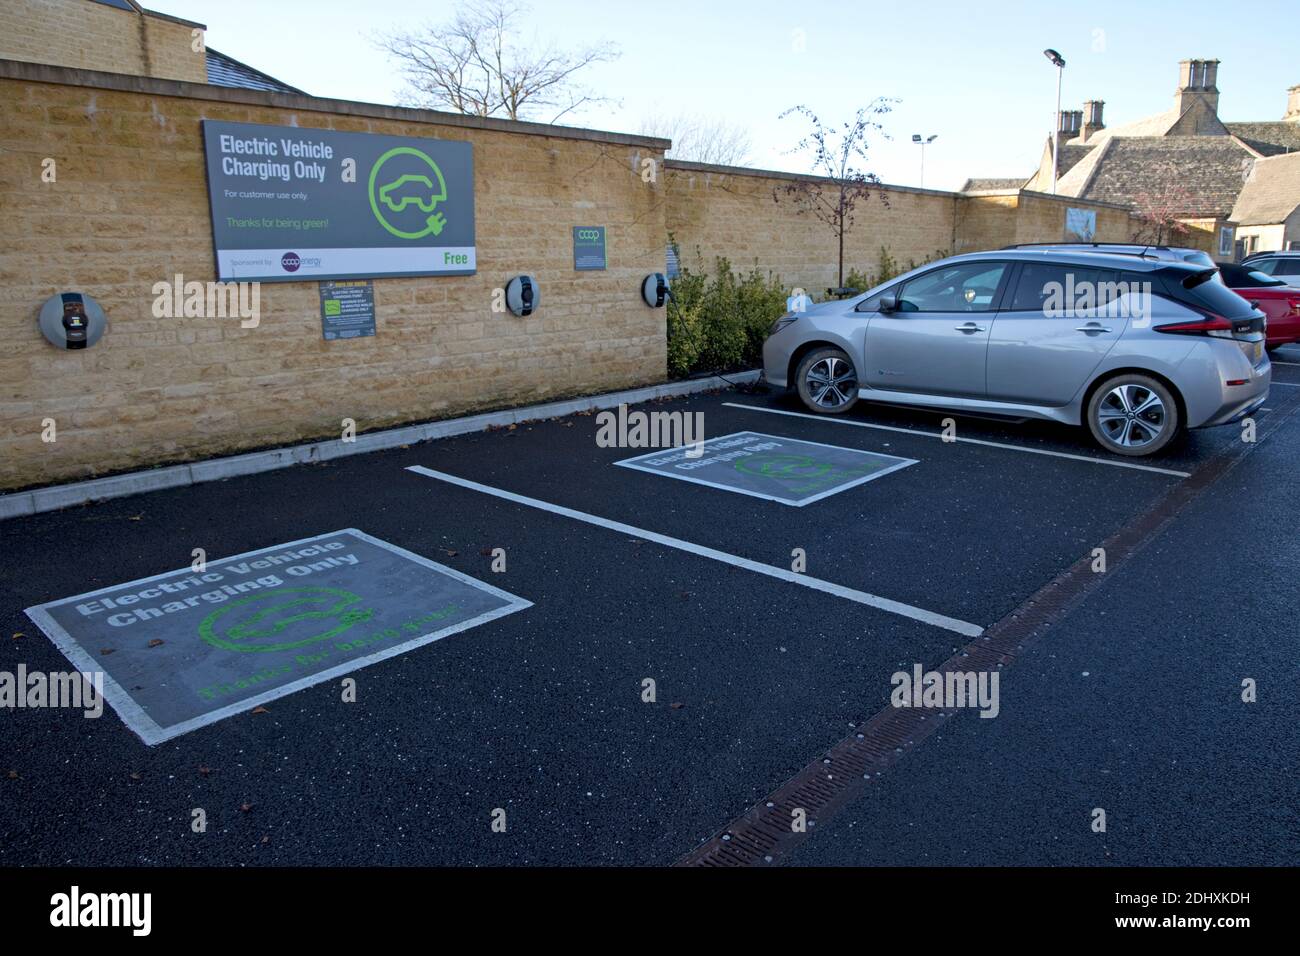 Electric vehilce charging points are Coop Supermarket Chipping Campden with Nissan Leaf on charge Stock Photo